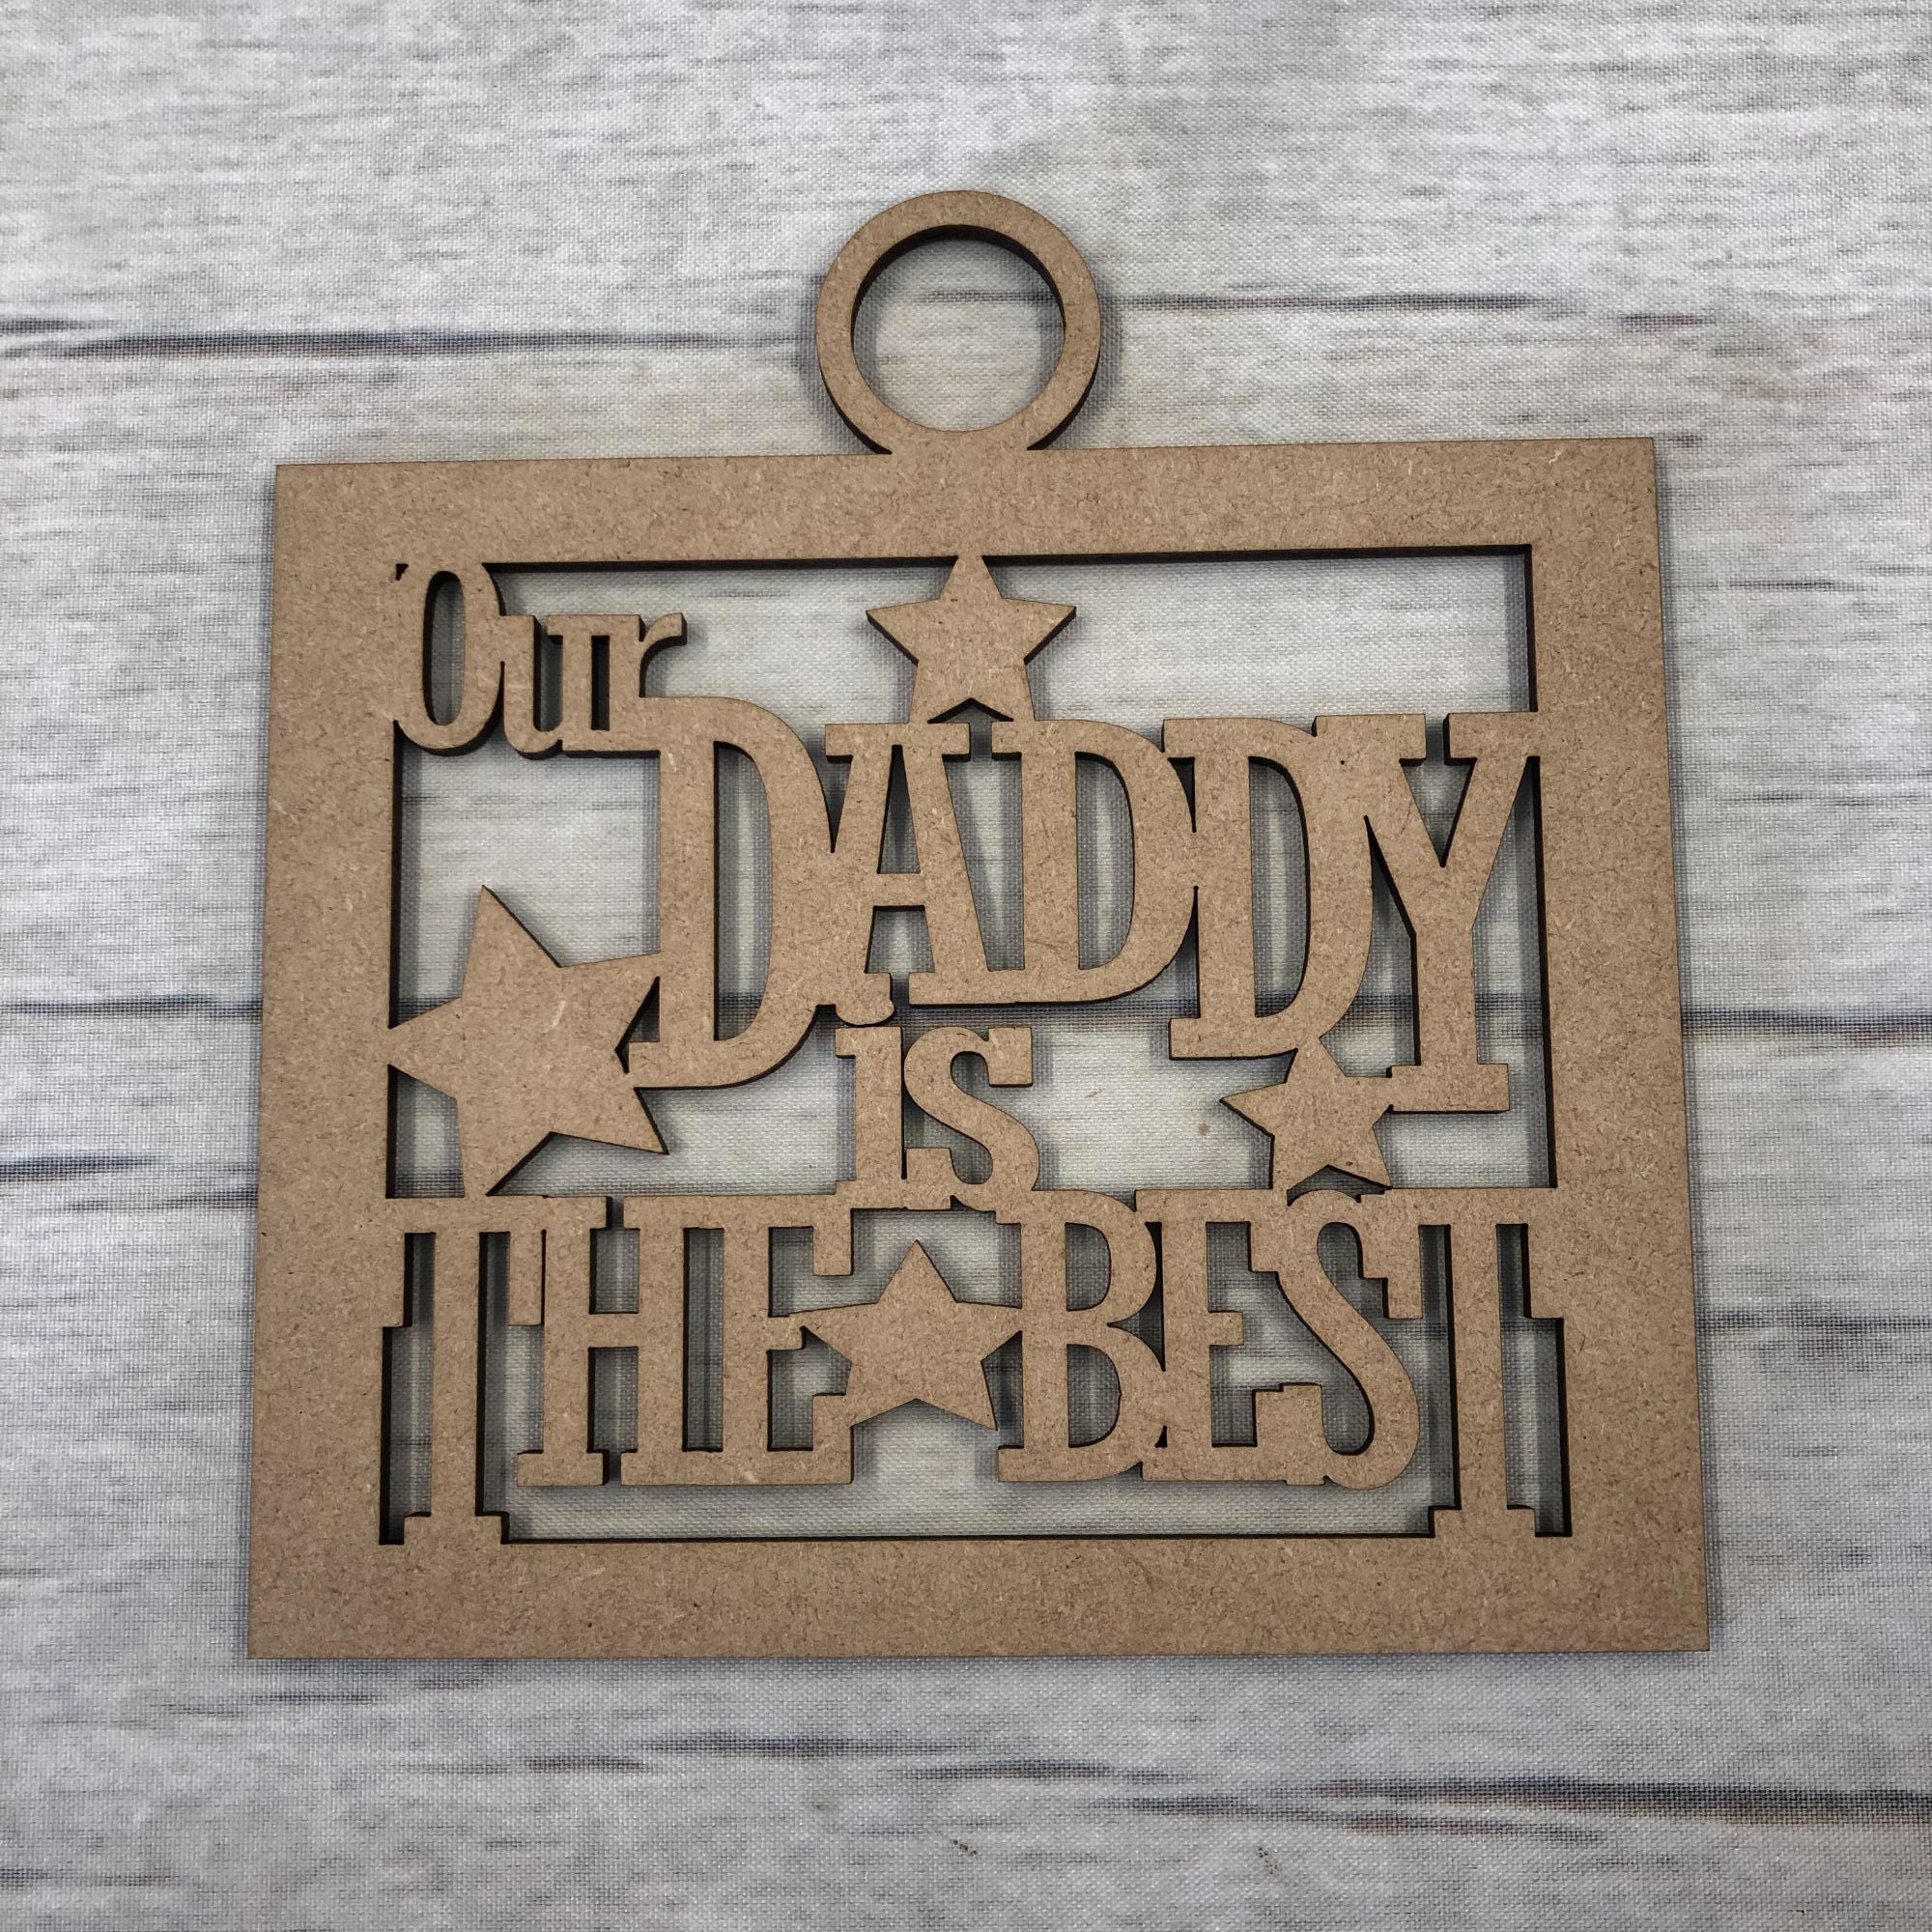 Our Daddy is the best' craft hanger